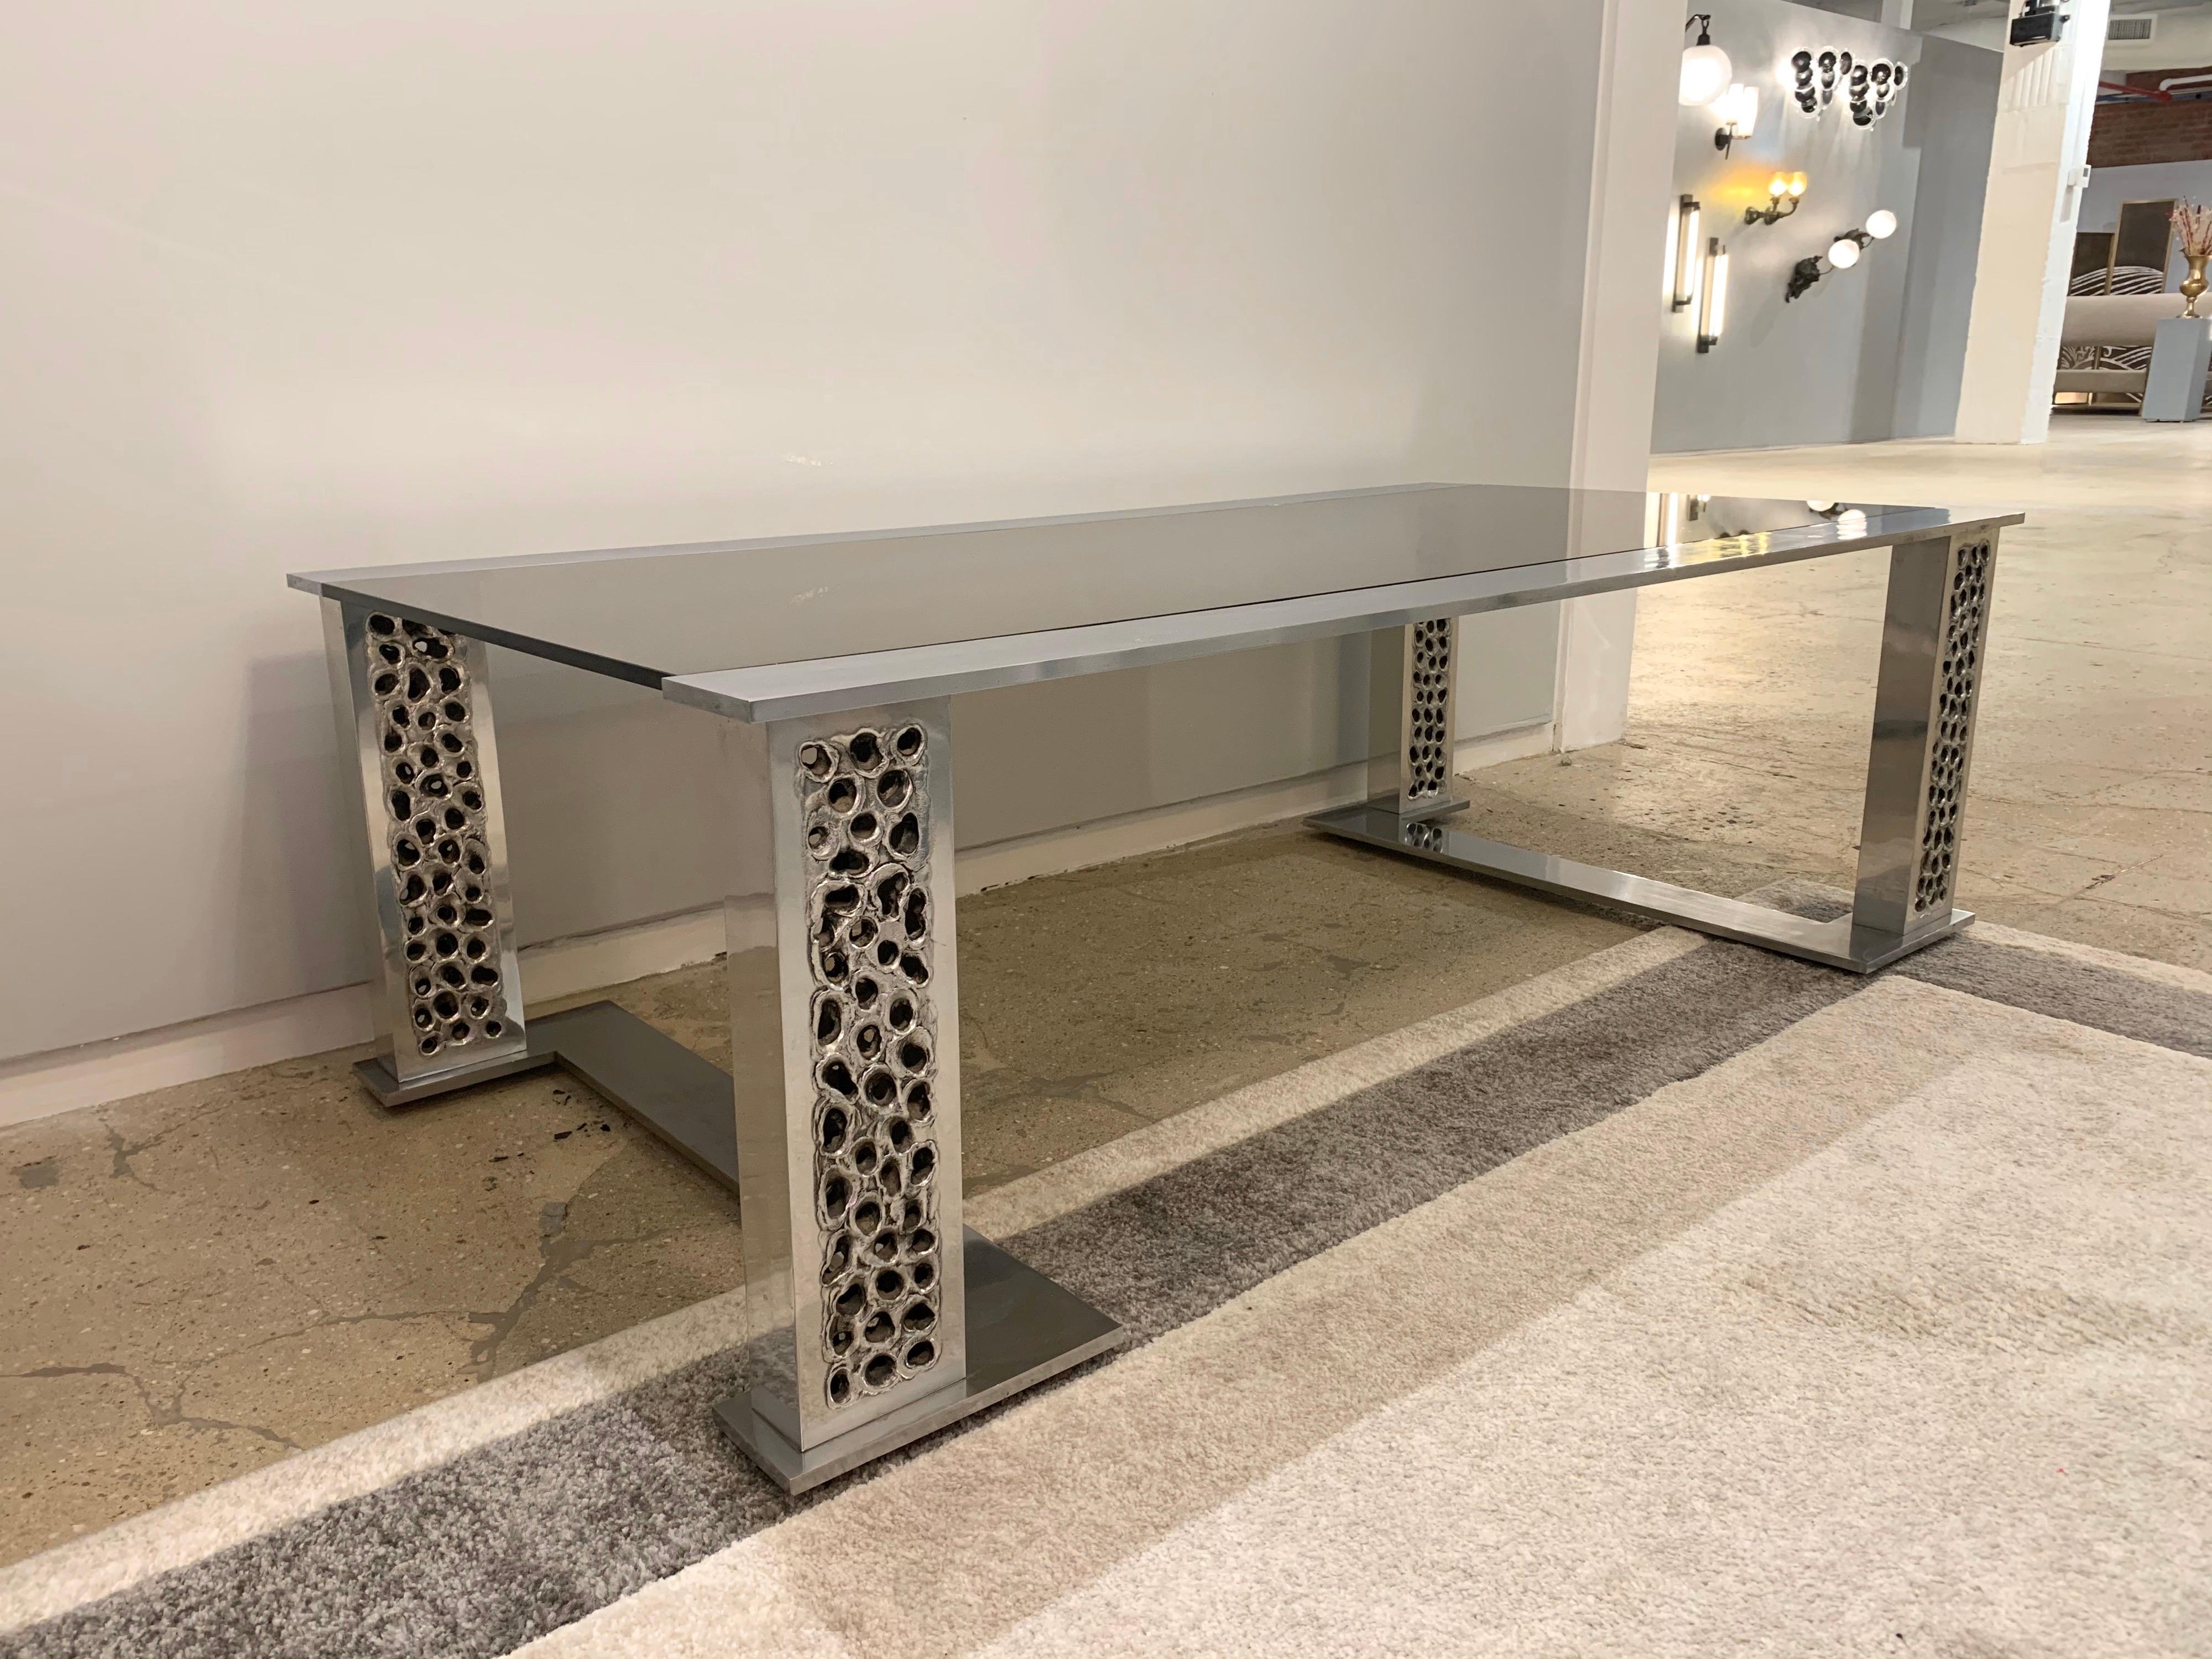 A rare original 1970s handmade burnt and hammered aluminum and smoked glass table by Belgian goldsmith, Willy Luyckx for Aluclair.


Willy Luyckx was a goldsmith who worked for goldsmith Camille Colruyt before starting his own business in the